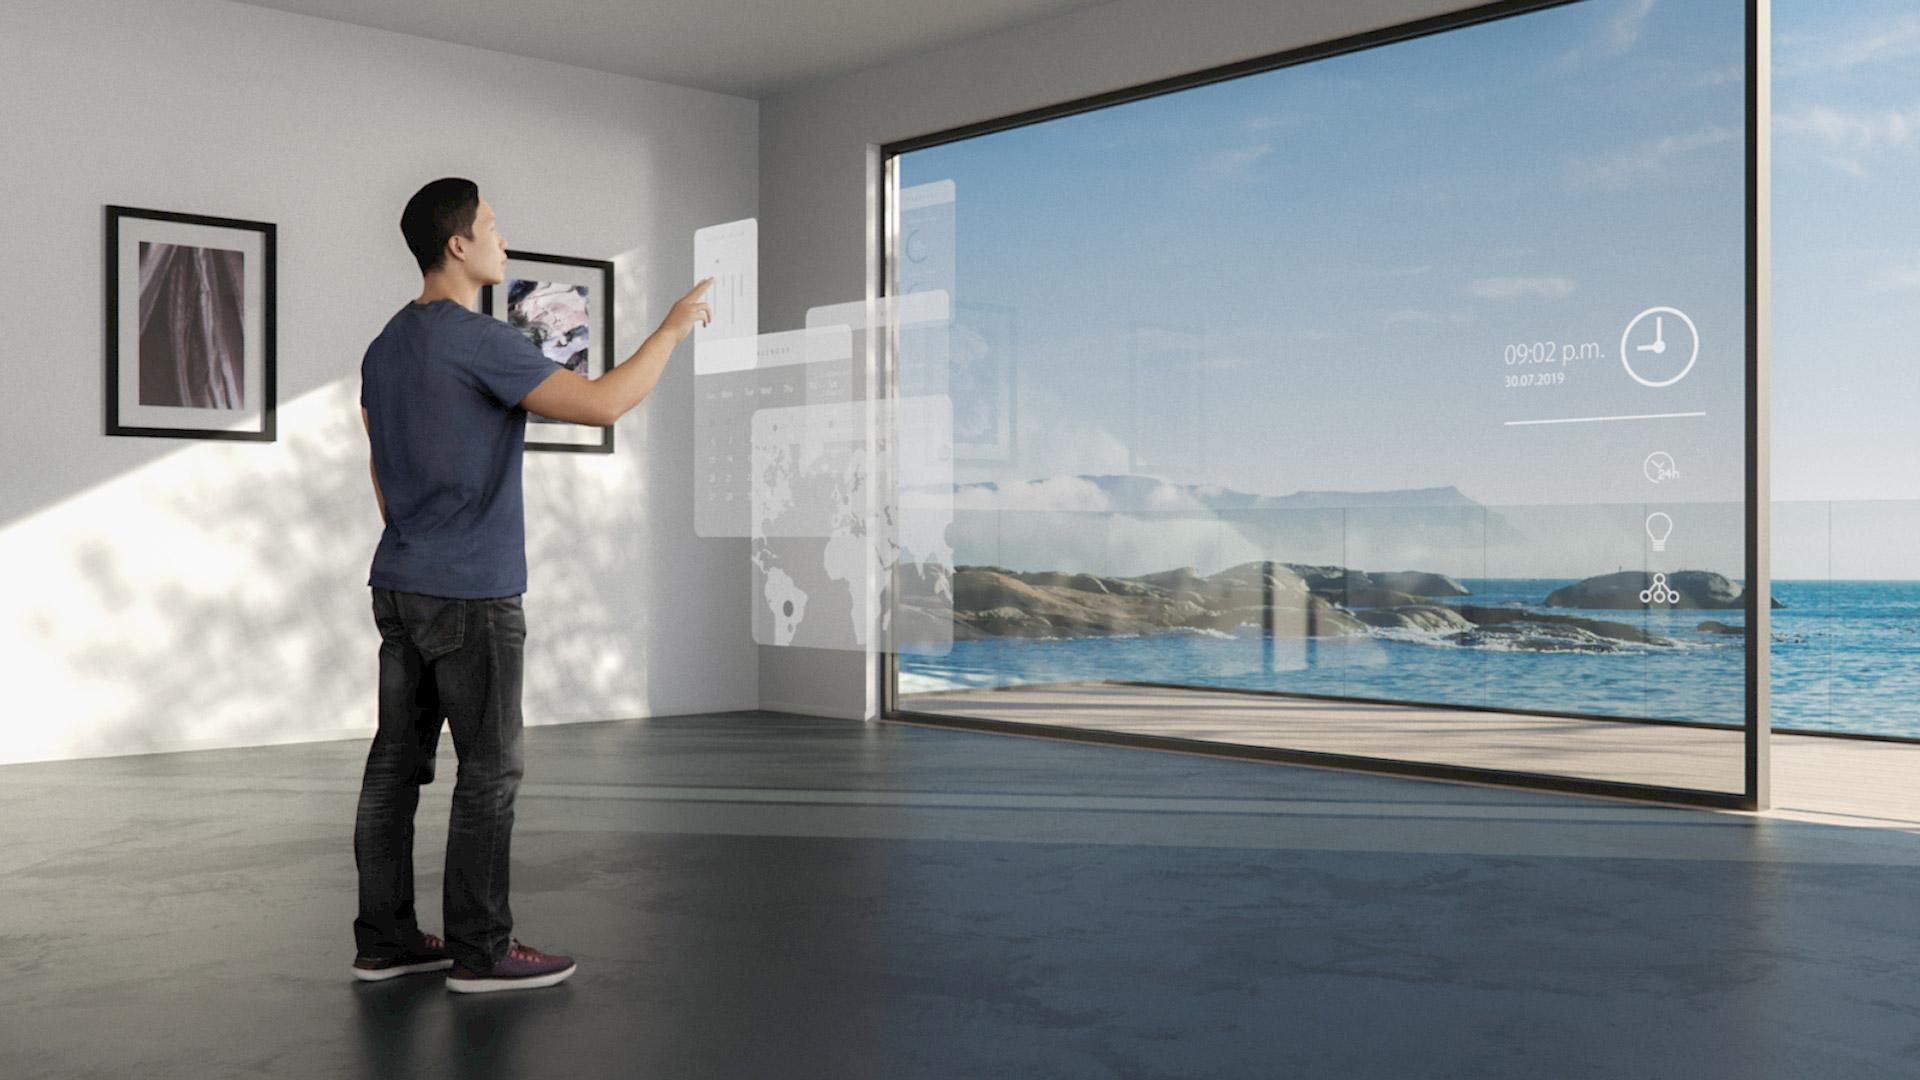 Smart glass is transforming everyday life